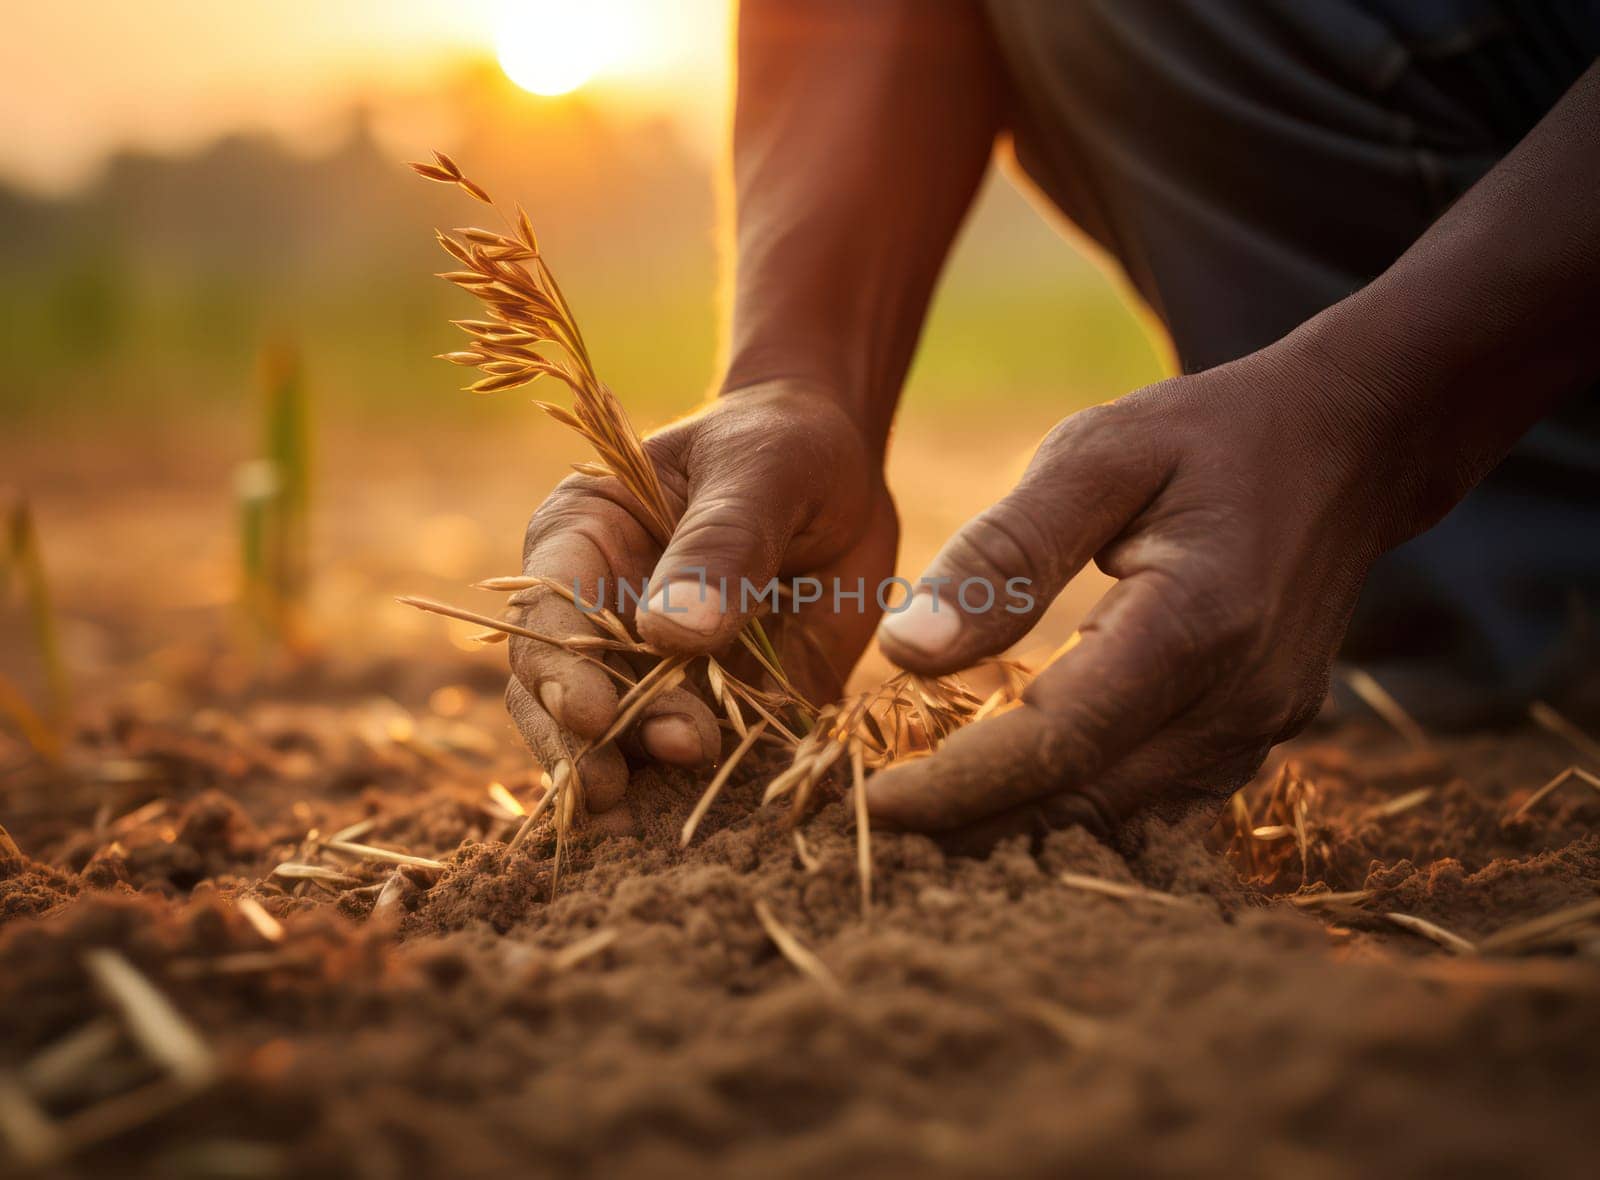 Organic Growth: A Farmer's Hands Planting in a Green Field at Sunset